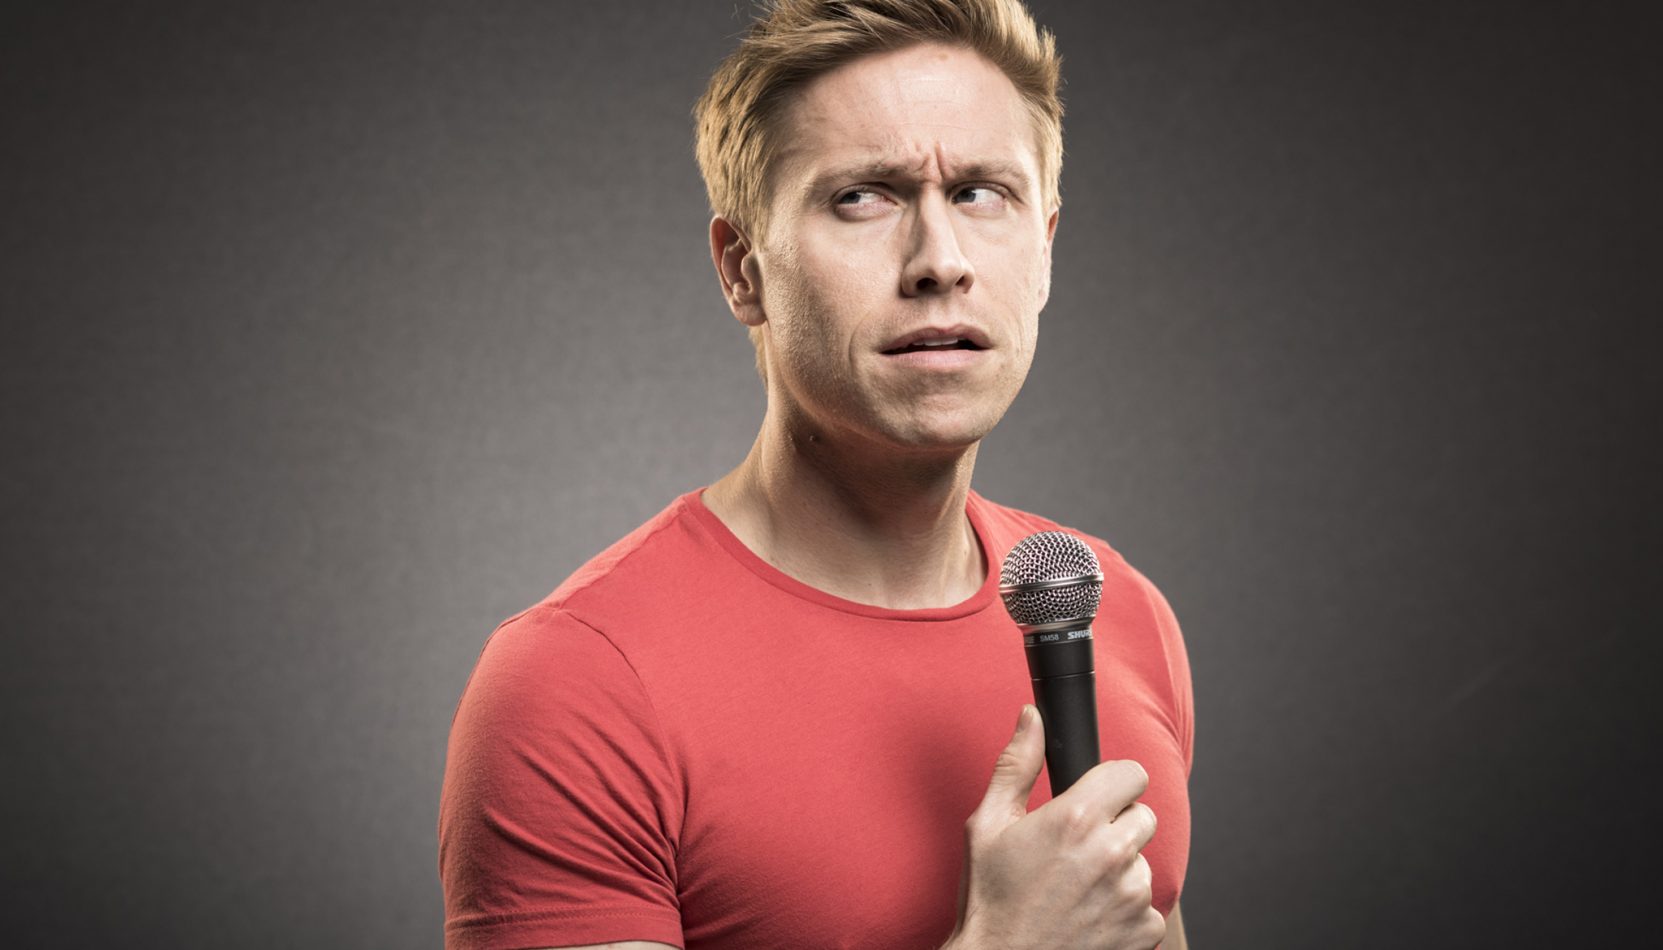 russel howard, windsor, theatre royal windsor, comedy, stand up comedy, whats on, september 2019